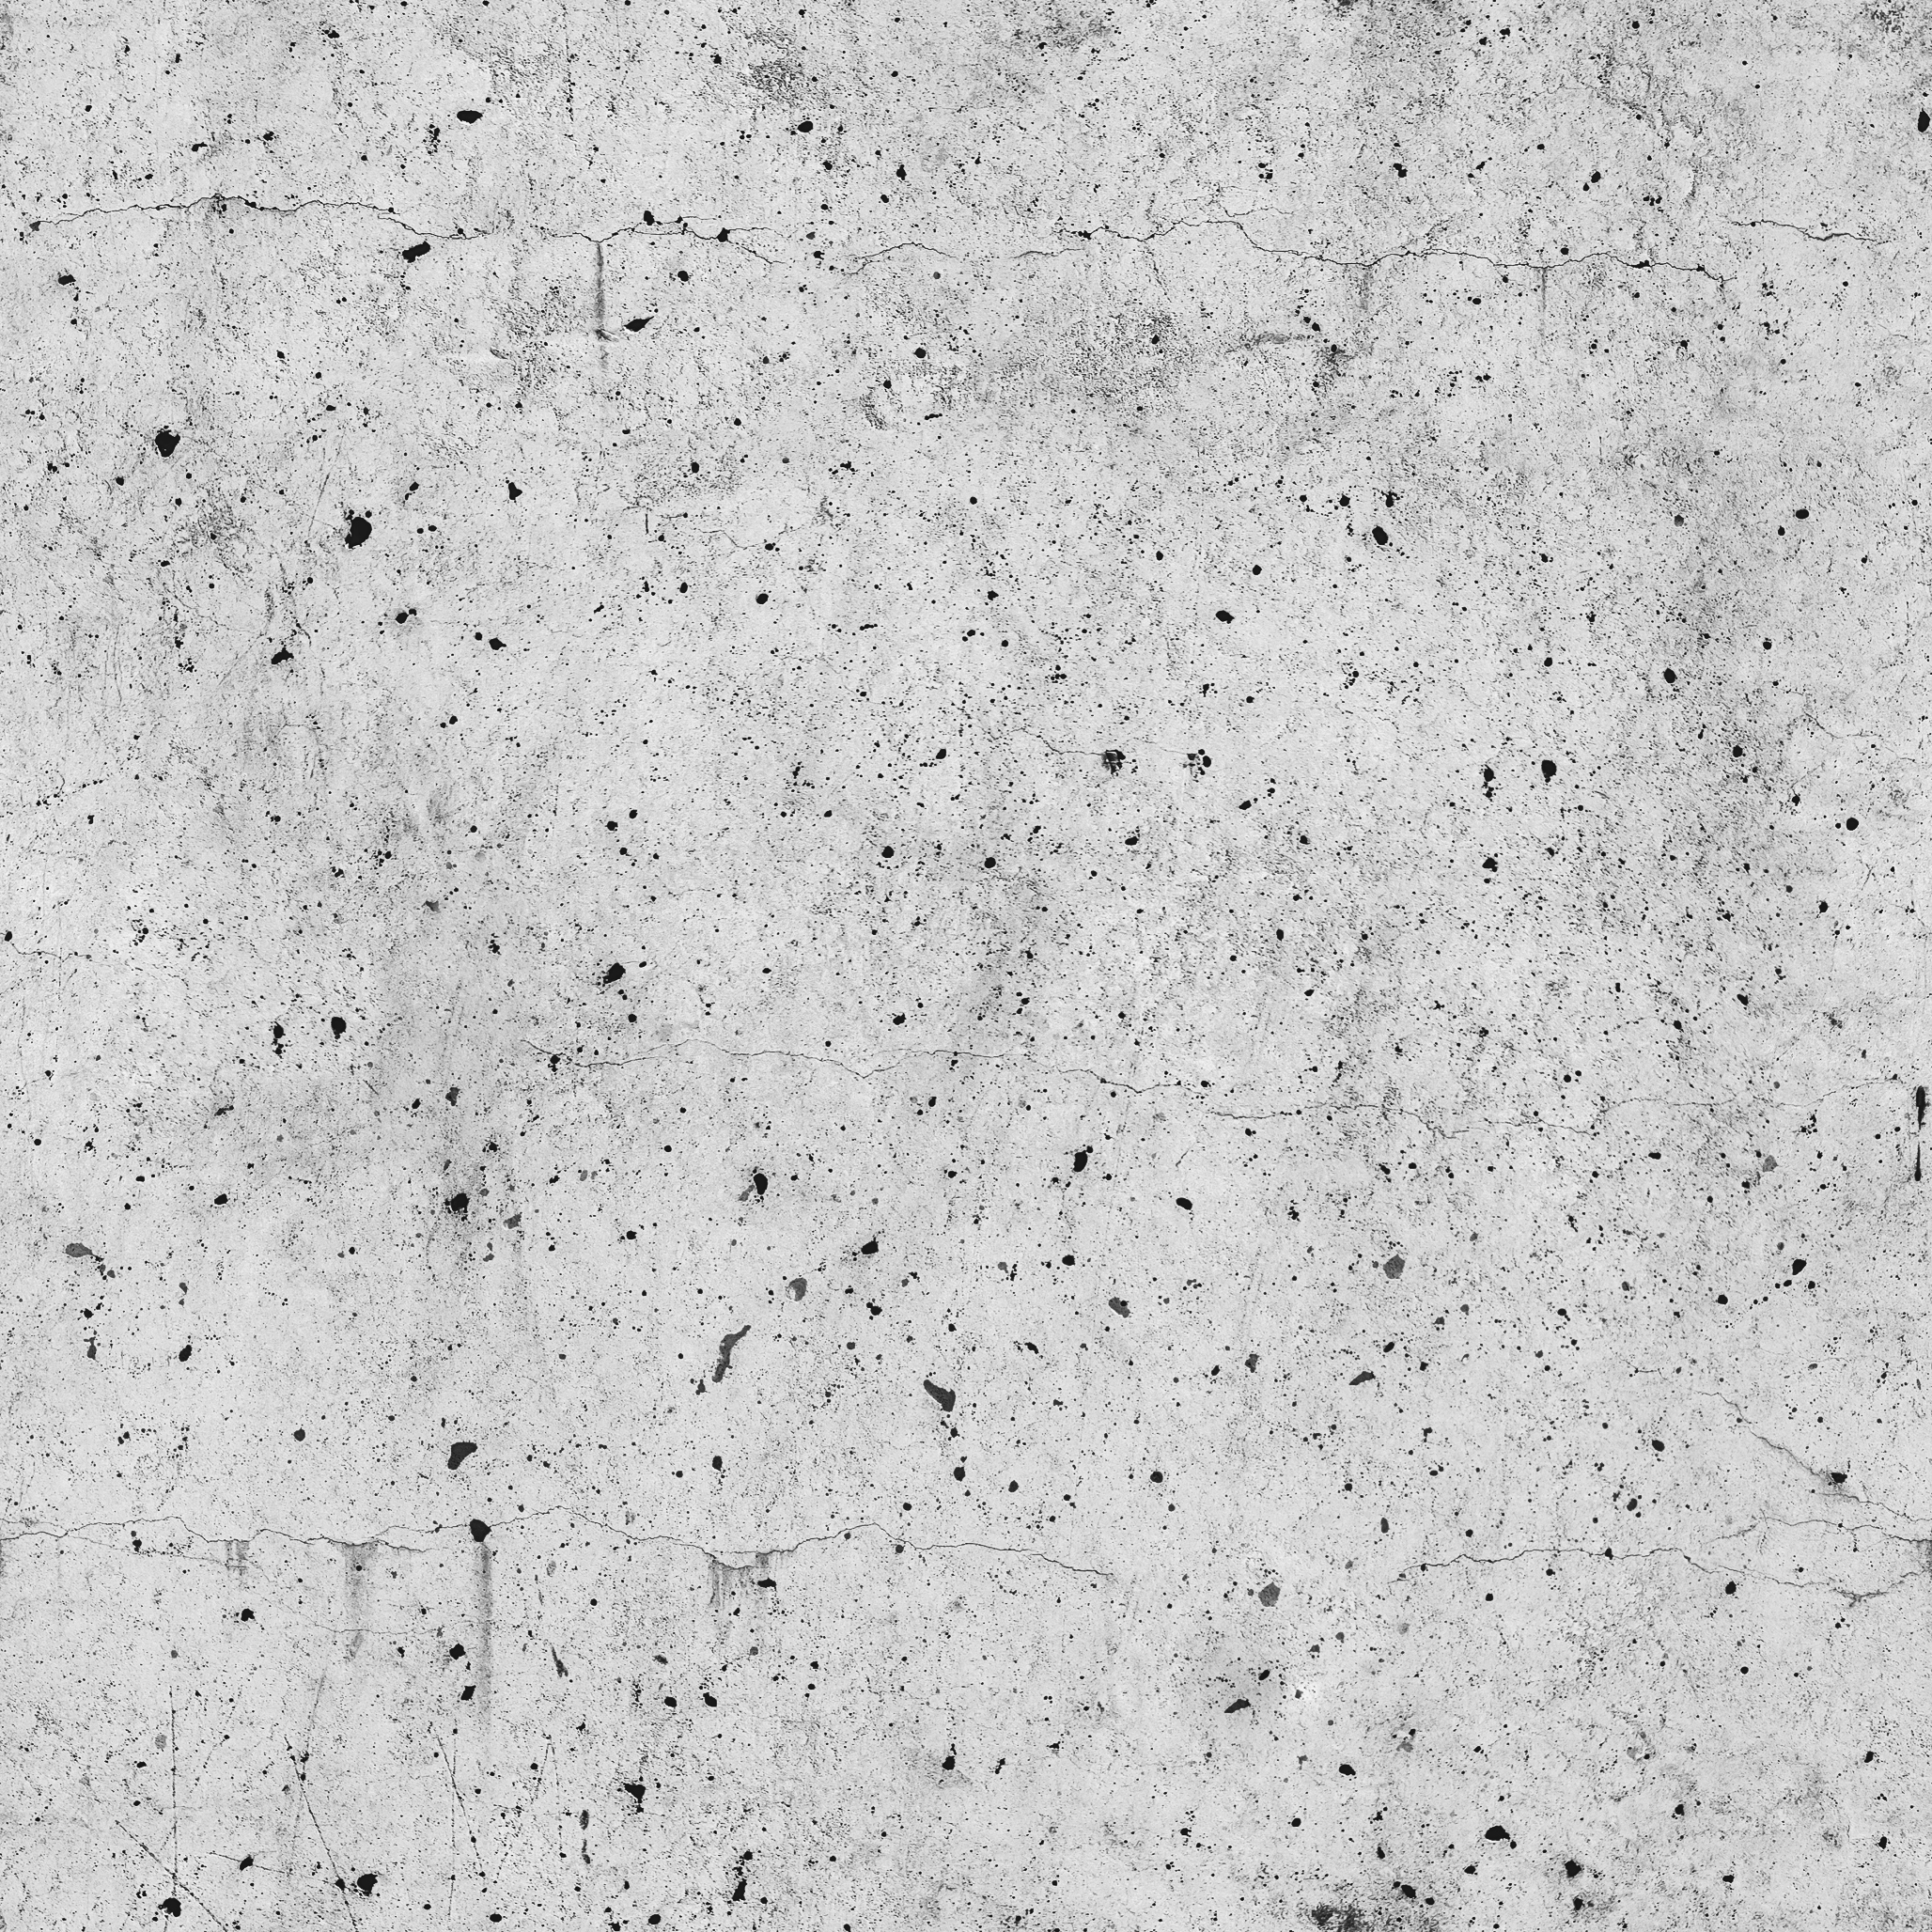 seamless polished concrete floor texture